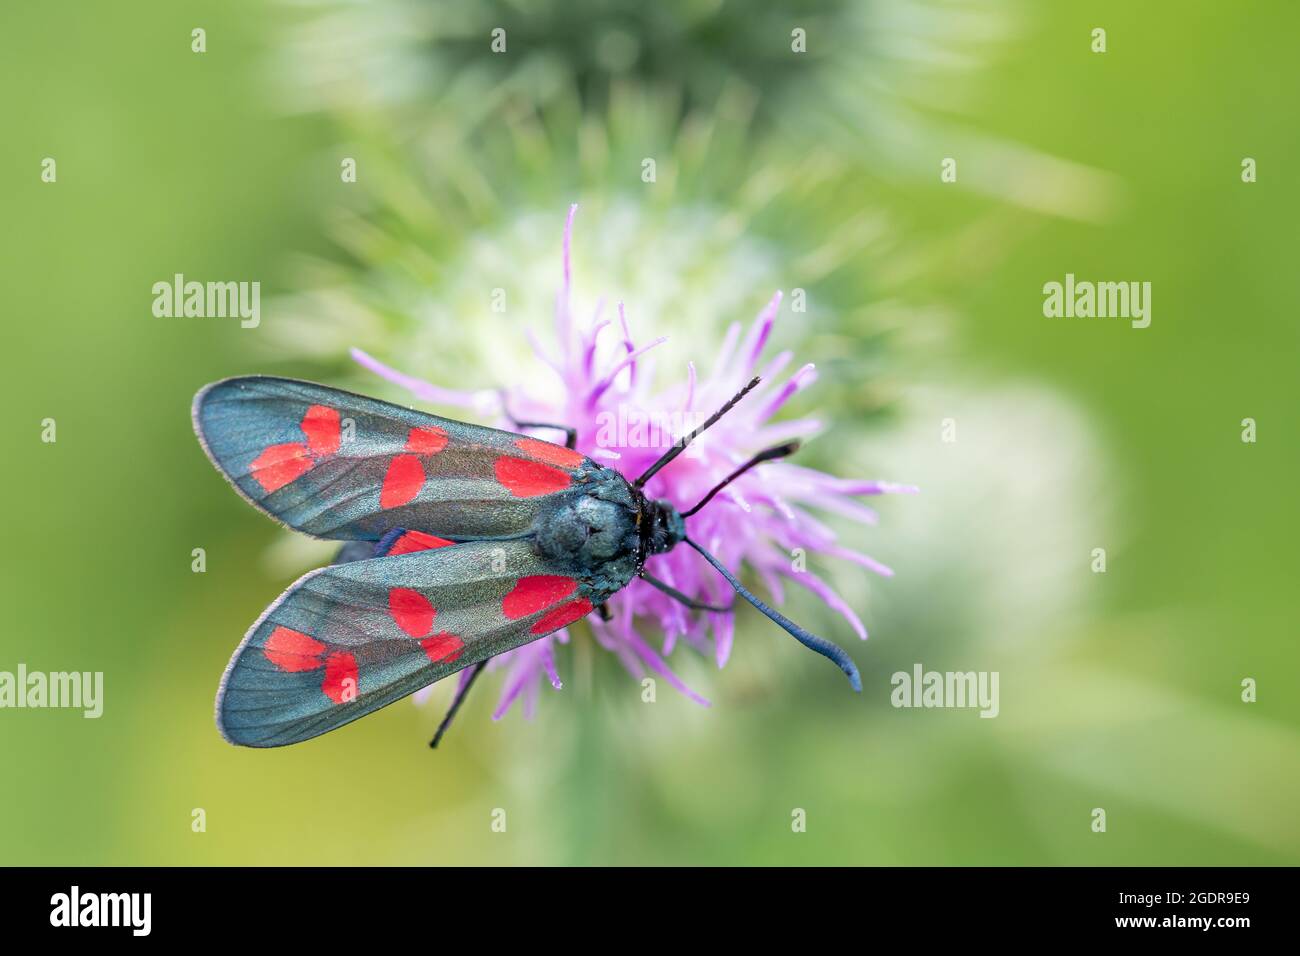 A six-spotted burnet drinking nectar from a thistle flower Stock Photo